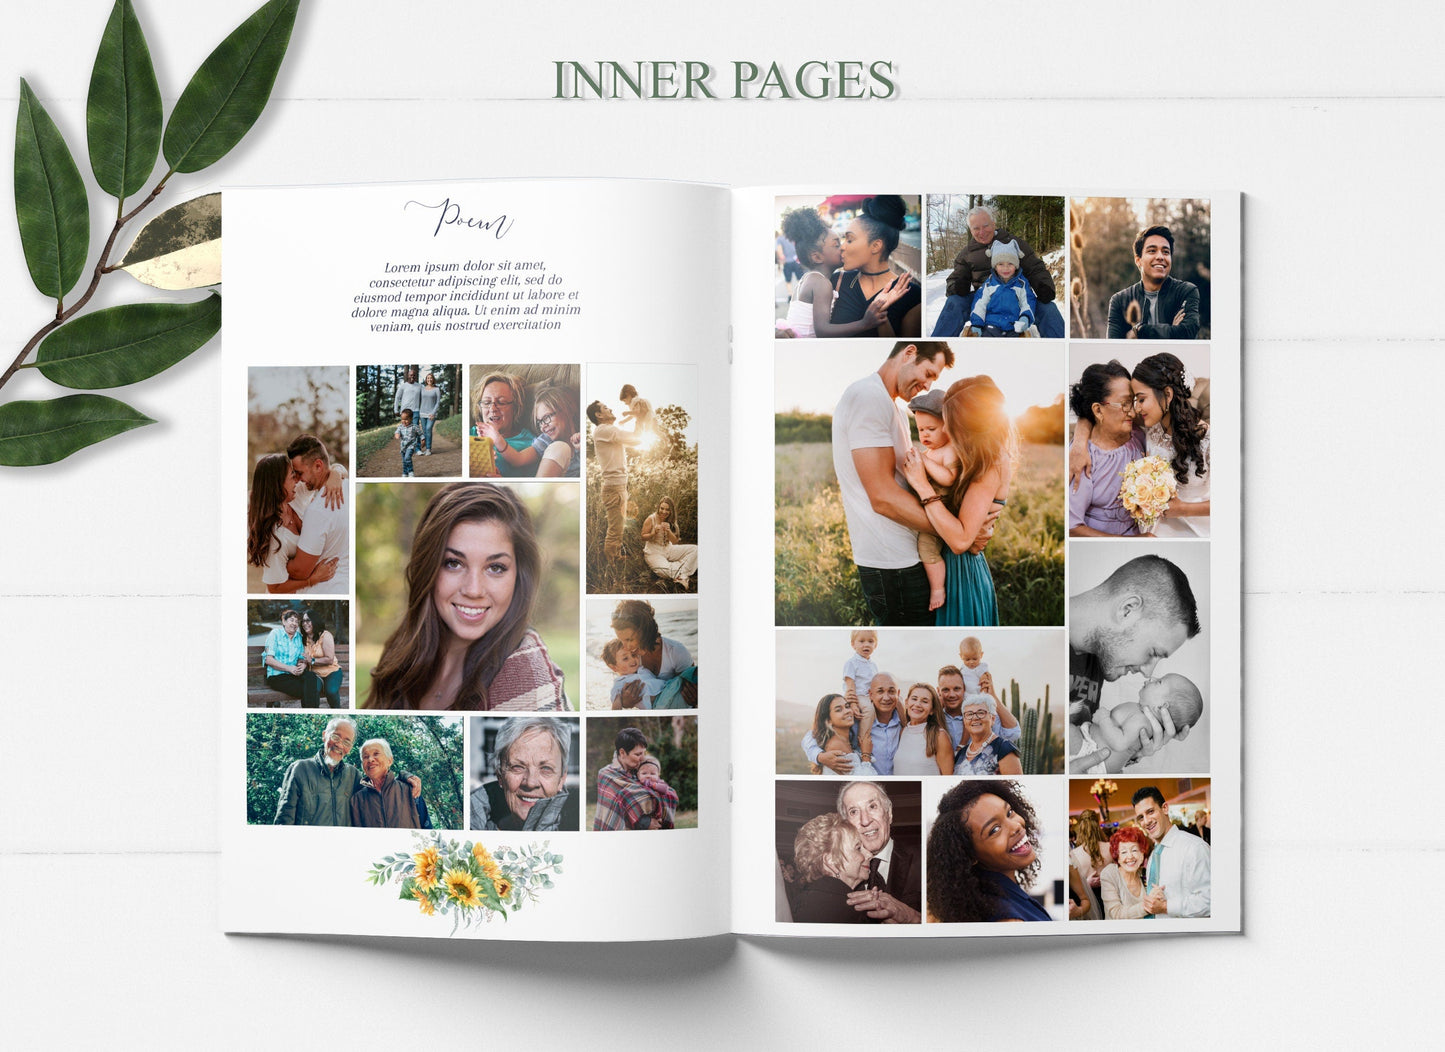 Sunflower Funeral Program Template for Woman - 8 page